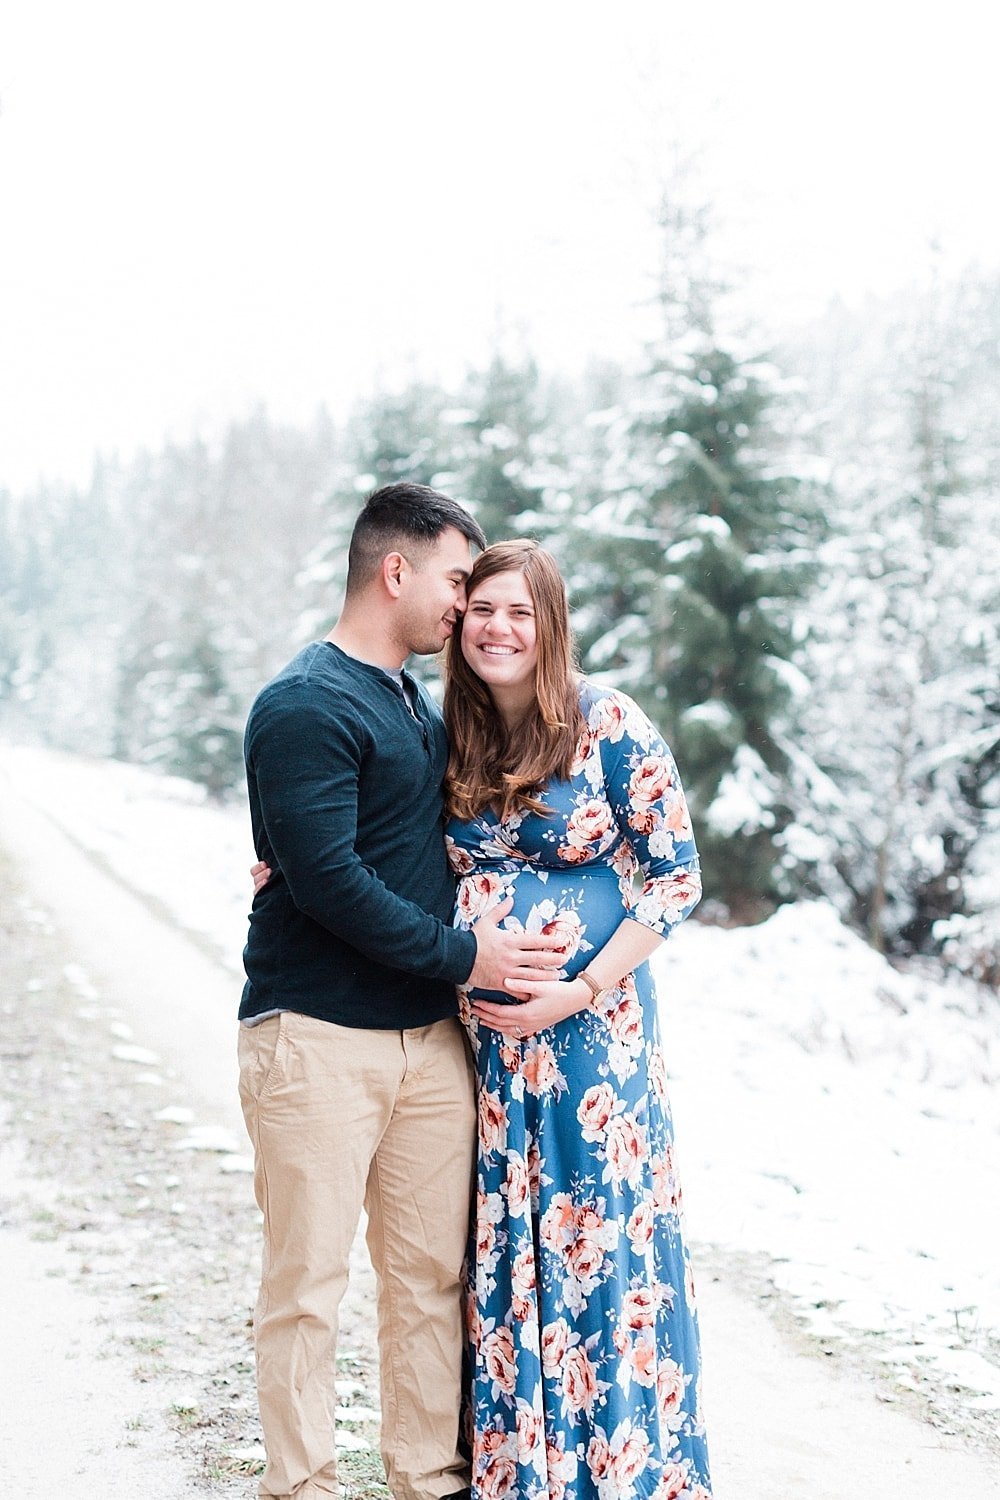 Snowy winter maternity session photographed by Alicia Yarrish Photography